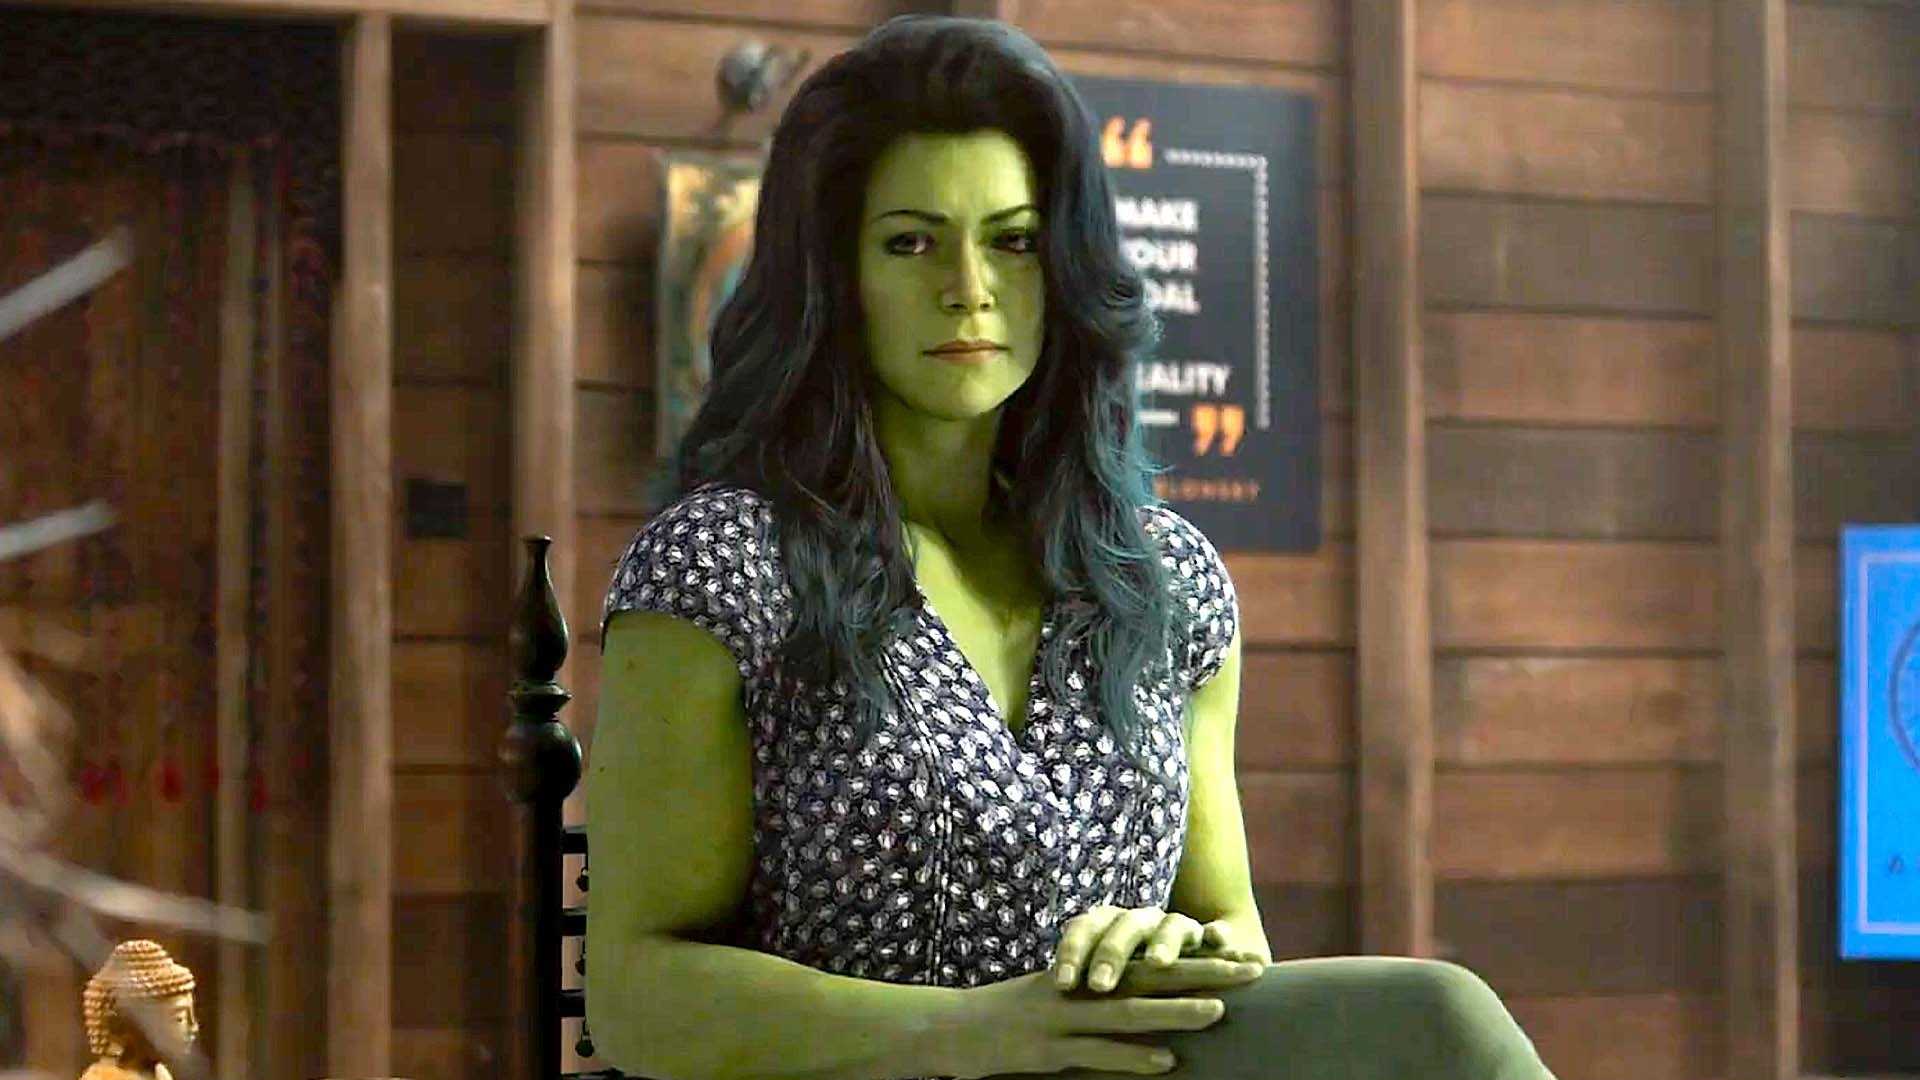 She-Hulk: Attorney at Law Episode 6 Review - Jennifer Walters takes on Titania in this episode that doesn't outstay its welcome